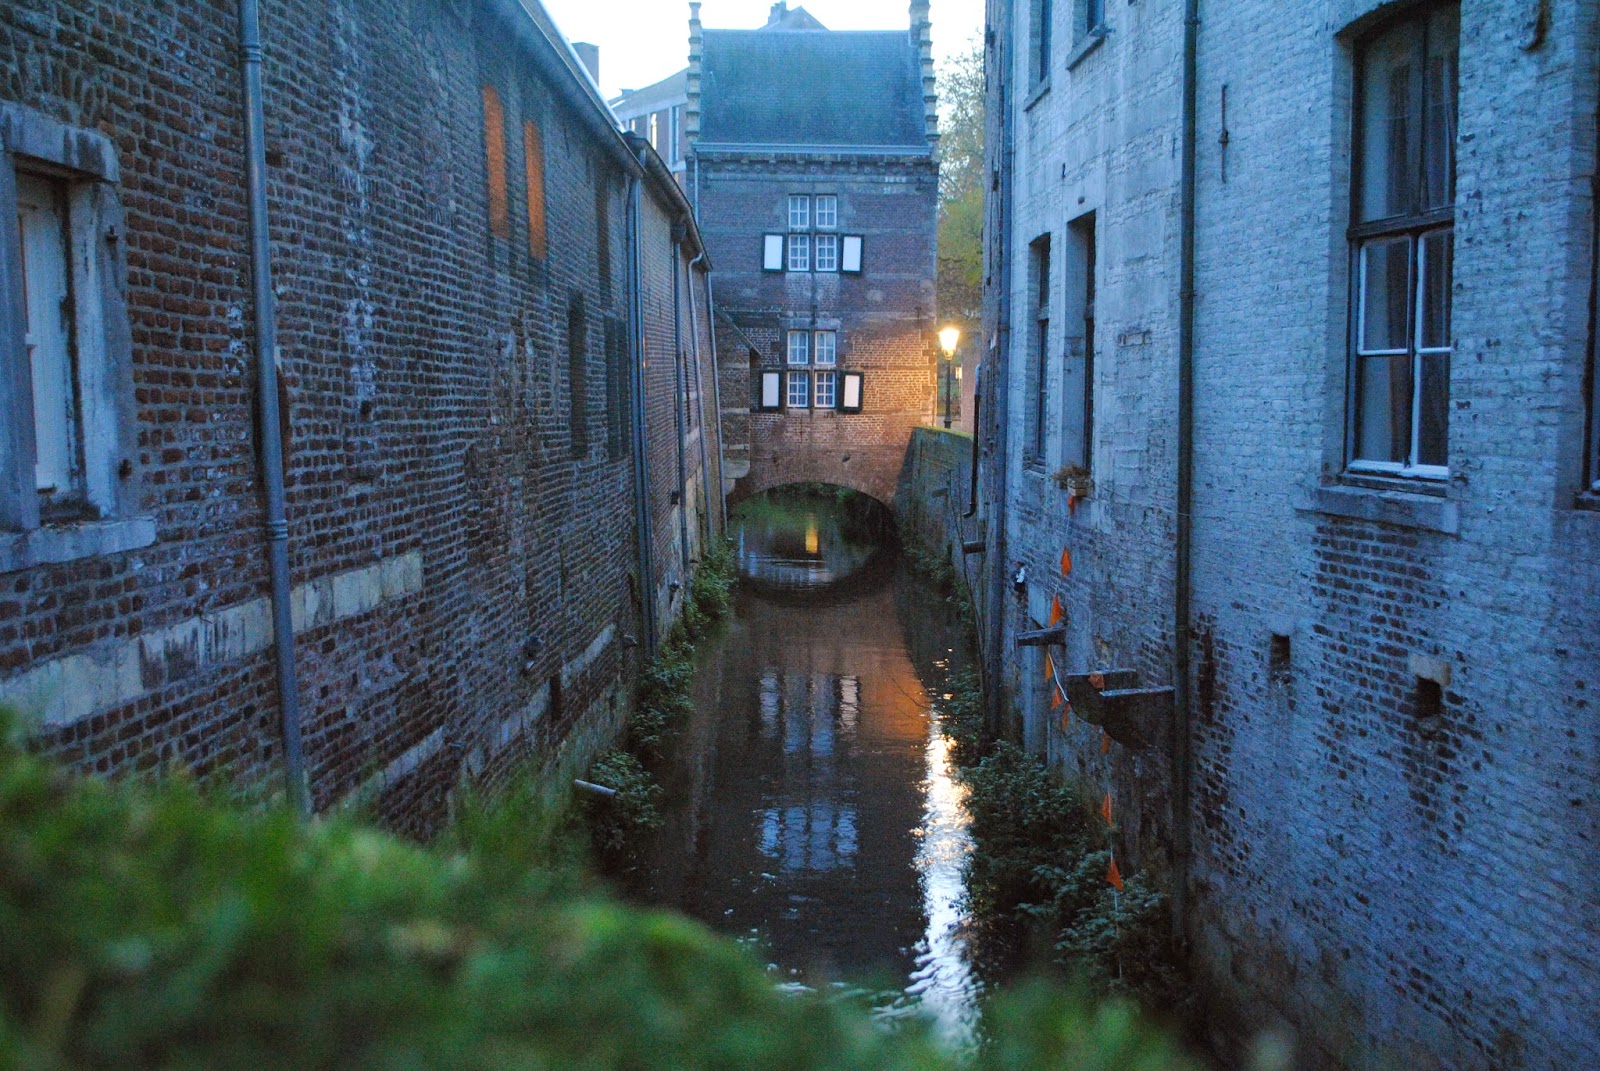 A secluded canal in Maastricht, the Netherlands.